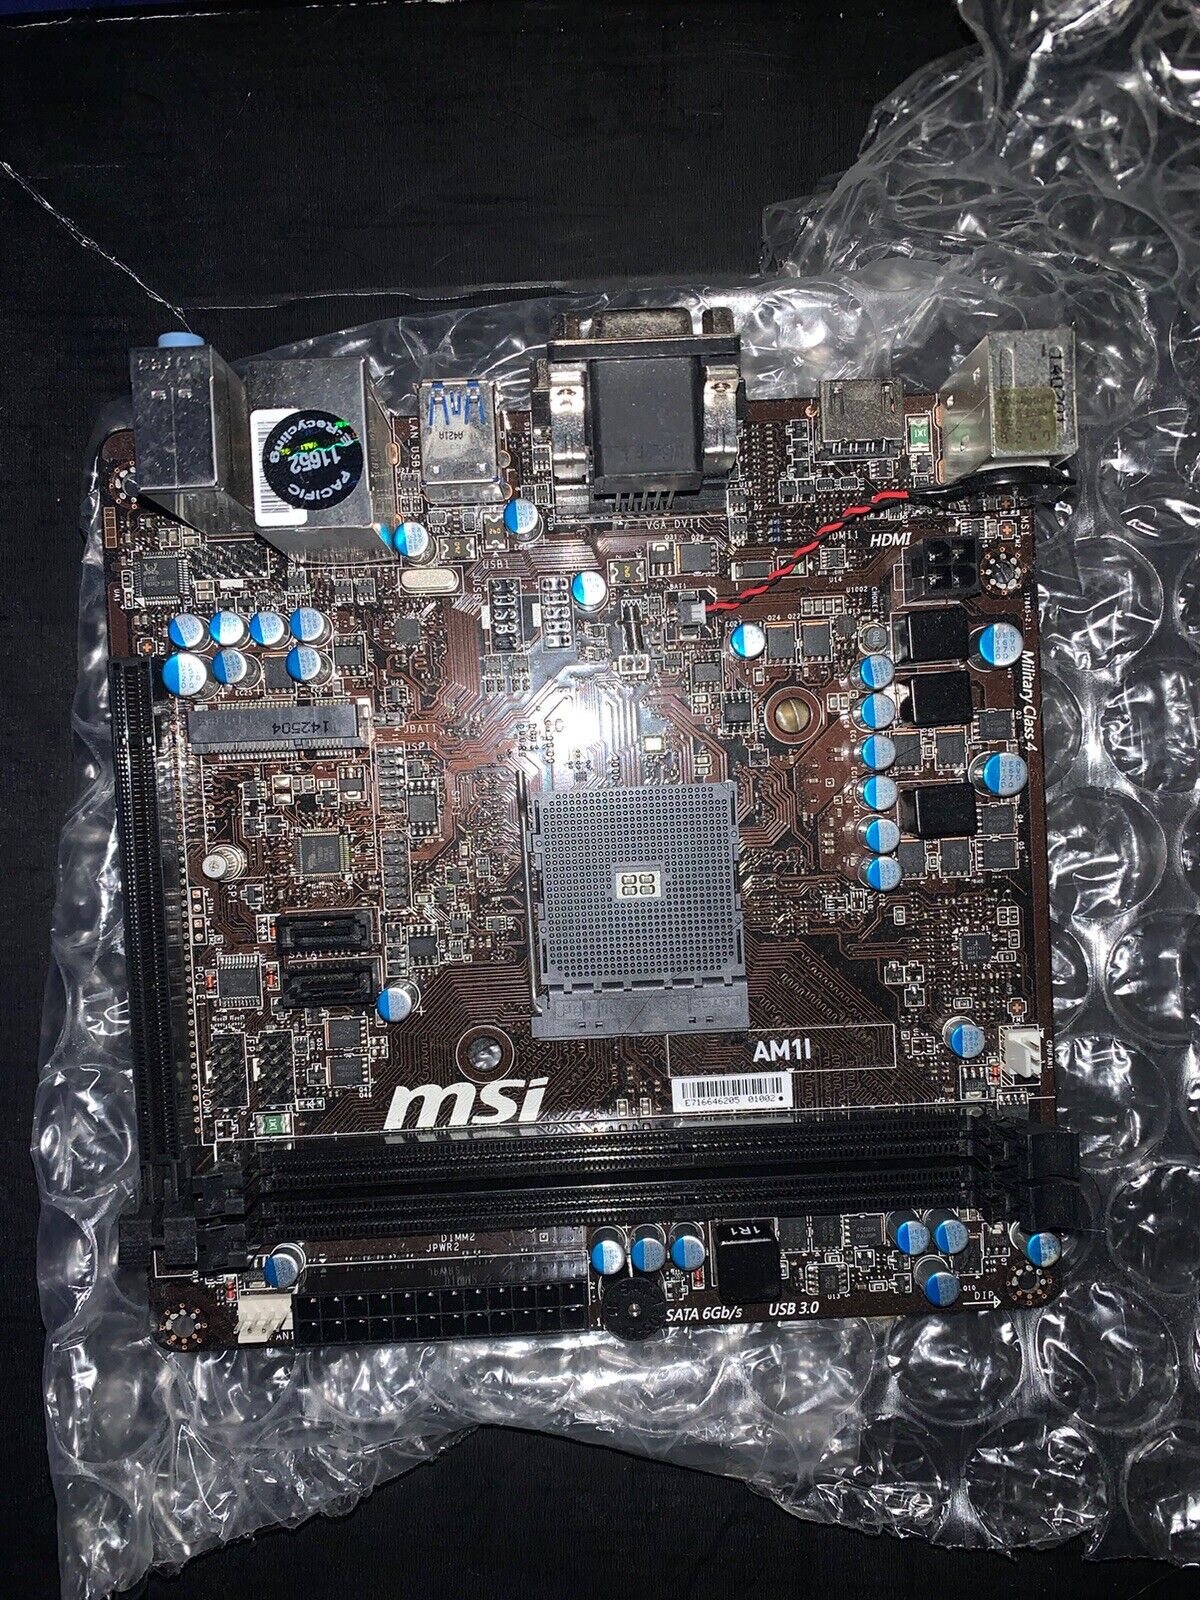 MSI AM1I, AMD Motherboard. Factory New. Never Used.